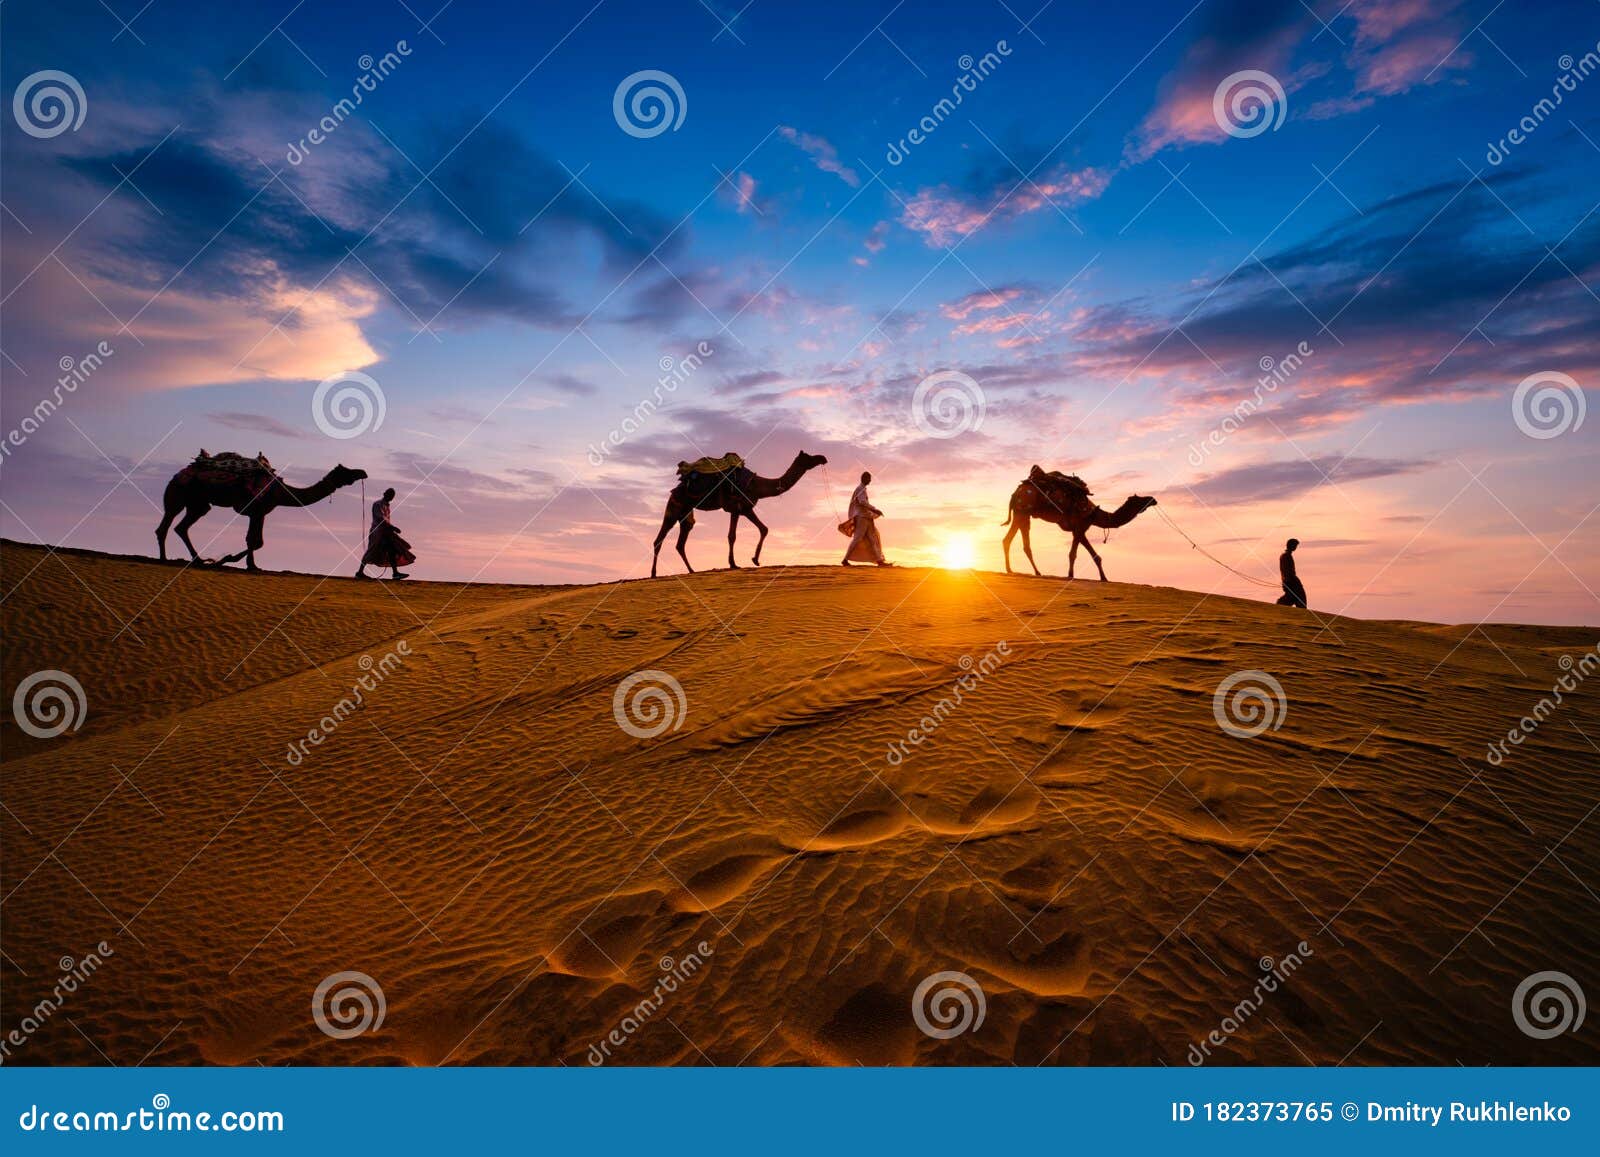 indian cameleers camel driver with camel silhouettes in dunes on sunset. jaisalmer, rajasthan, india